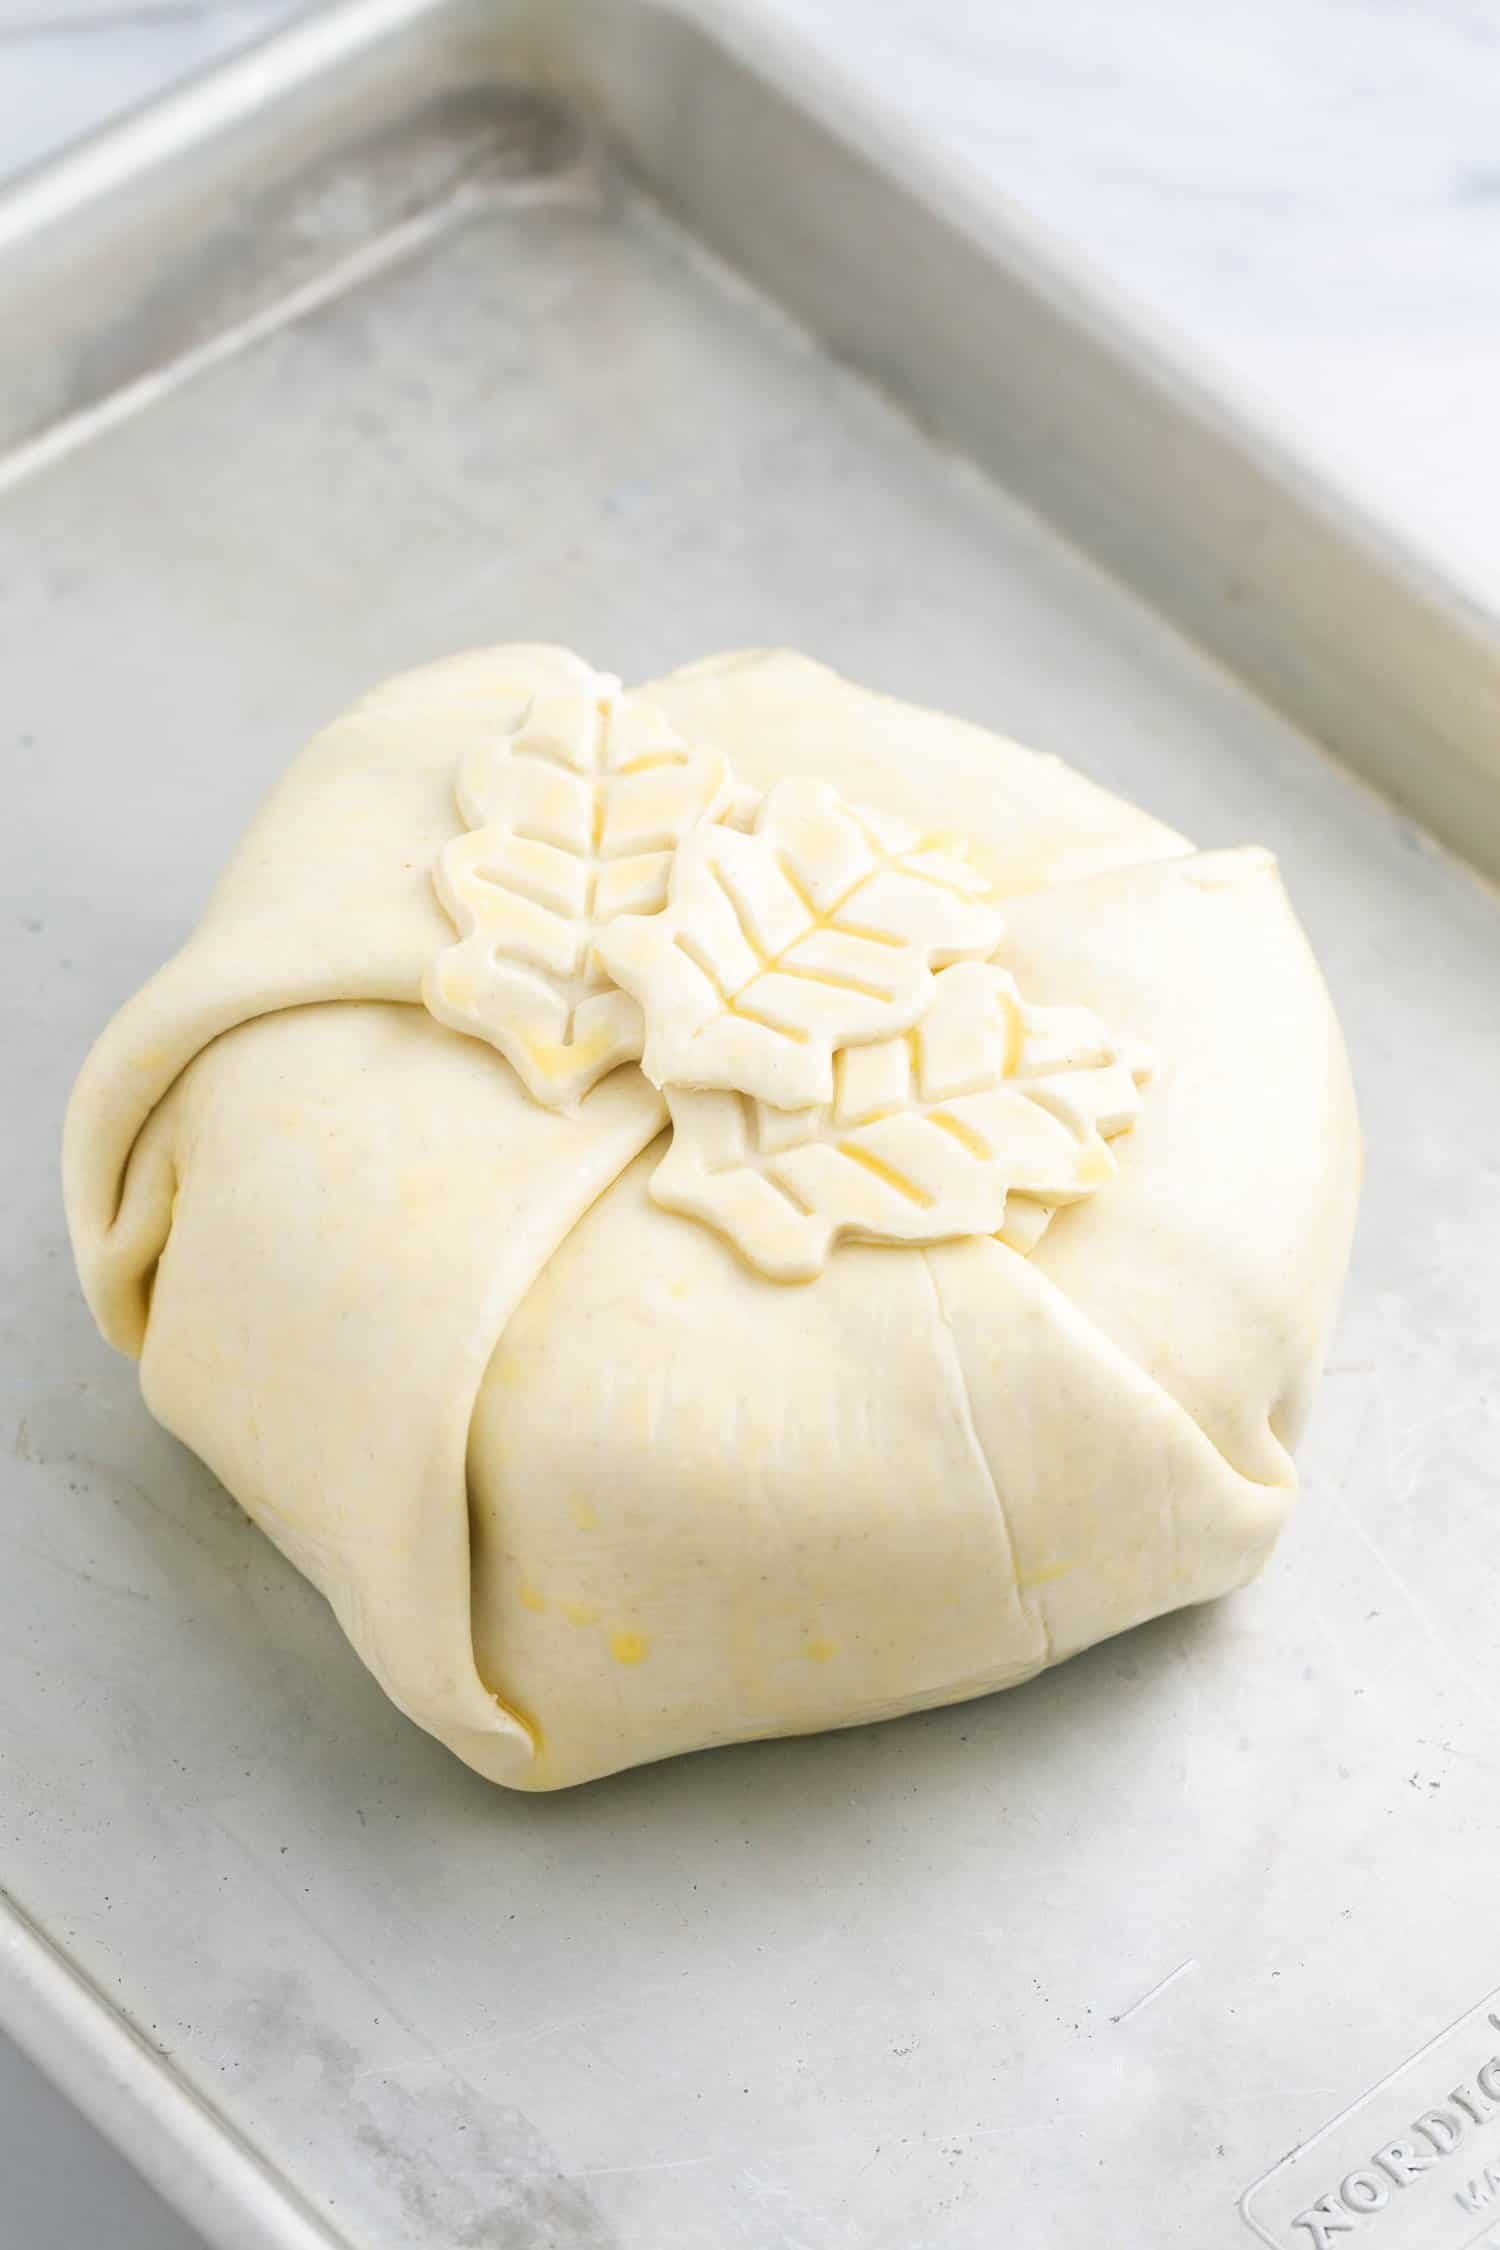 Brie wrapped in puff pastry with leaf cut out shapes, placed on a baking sheet before baking